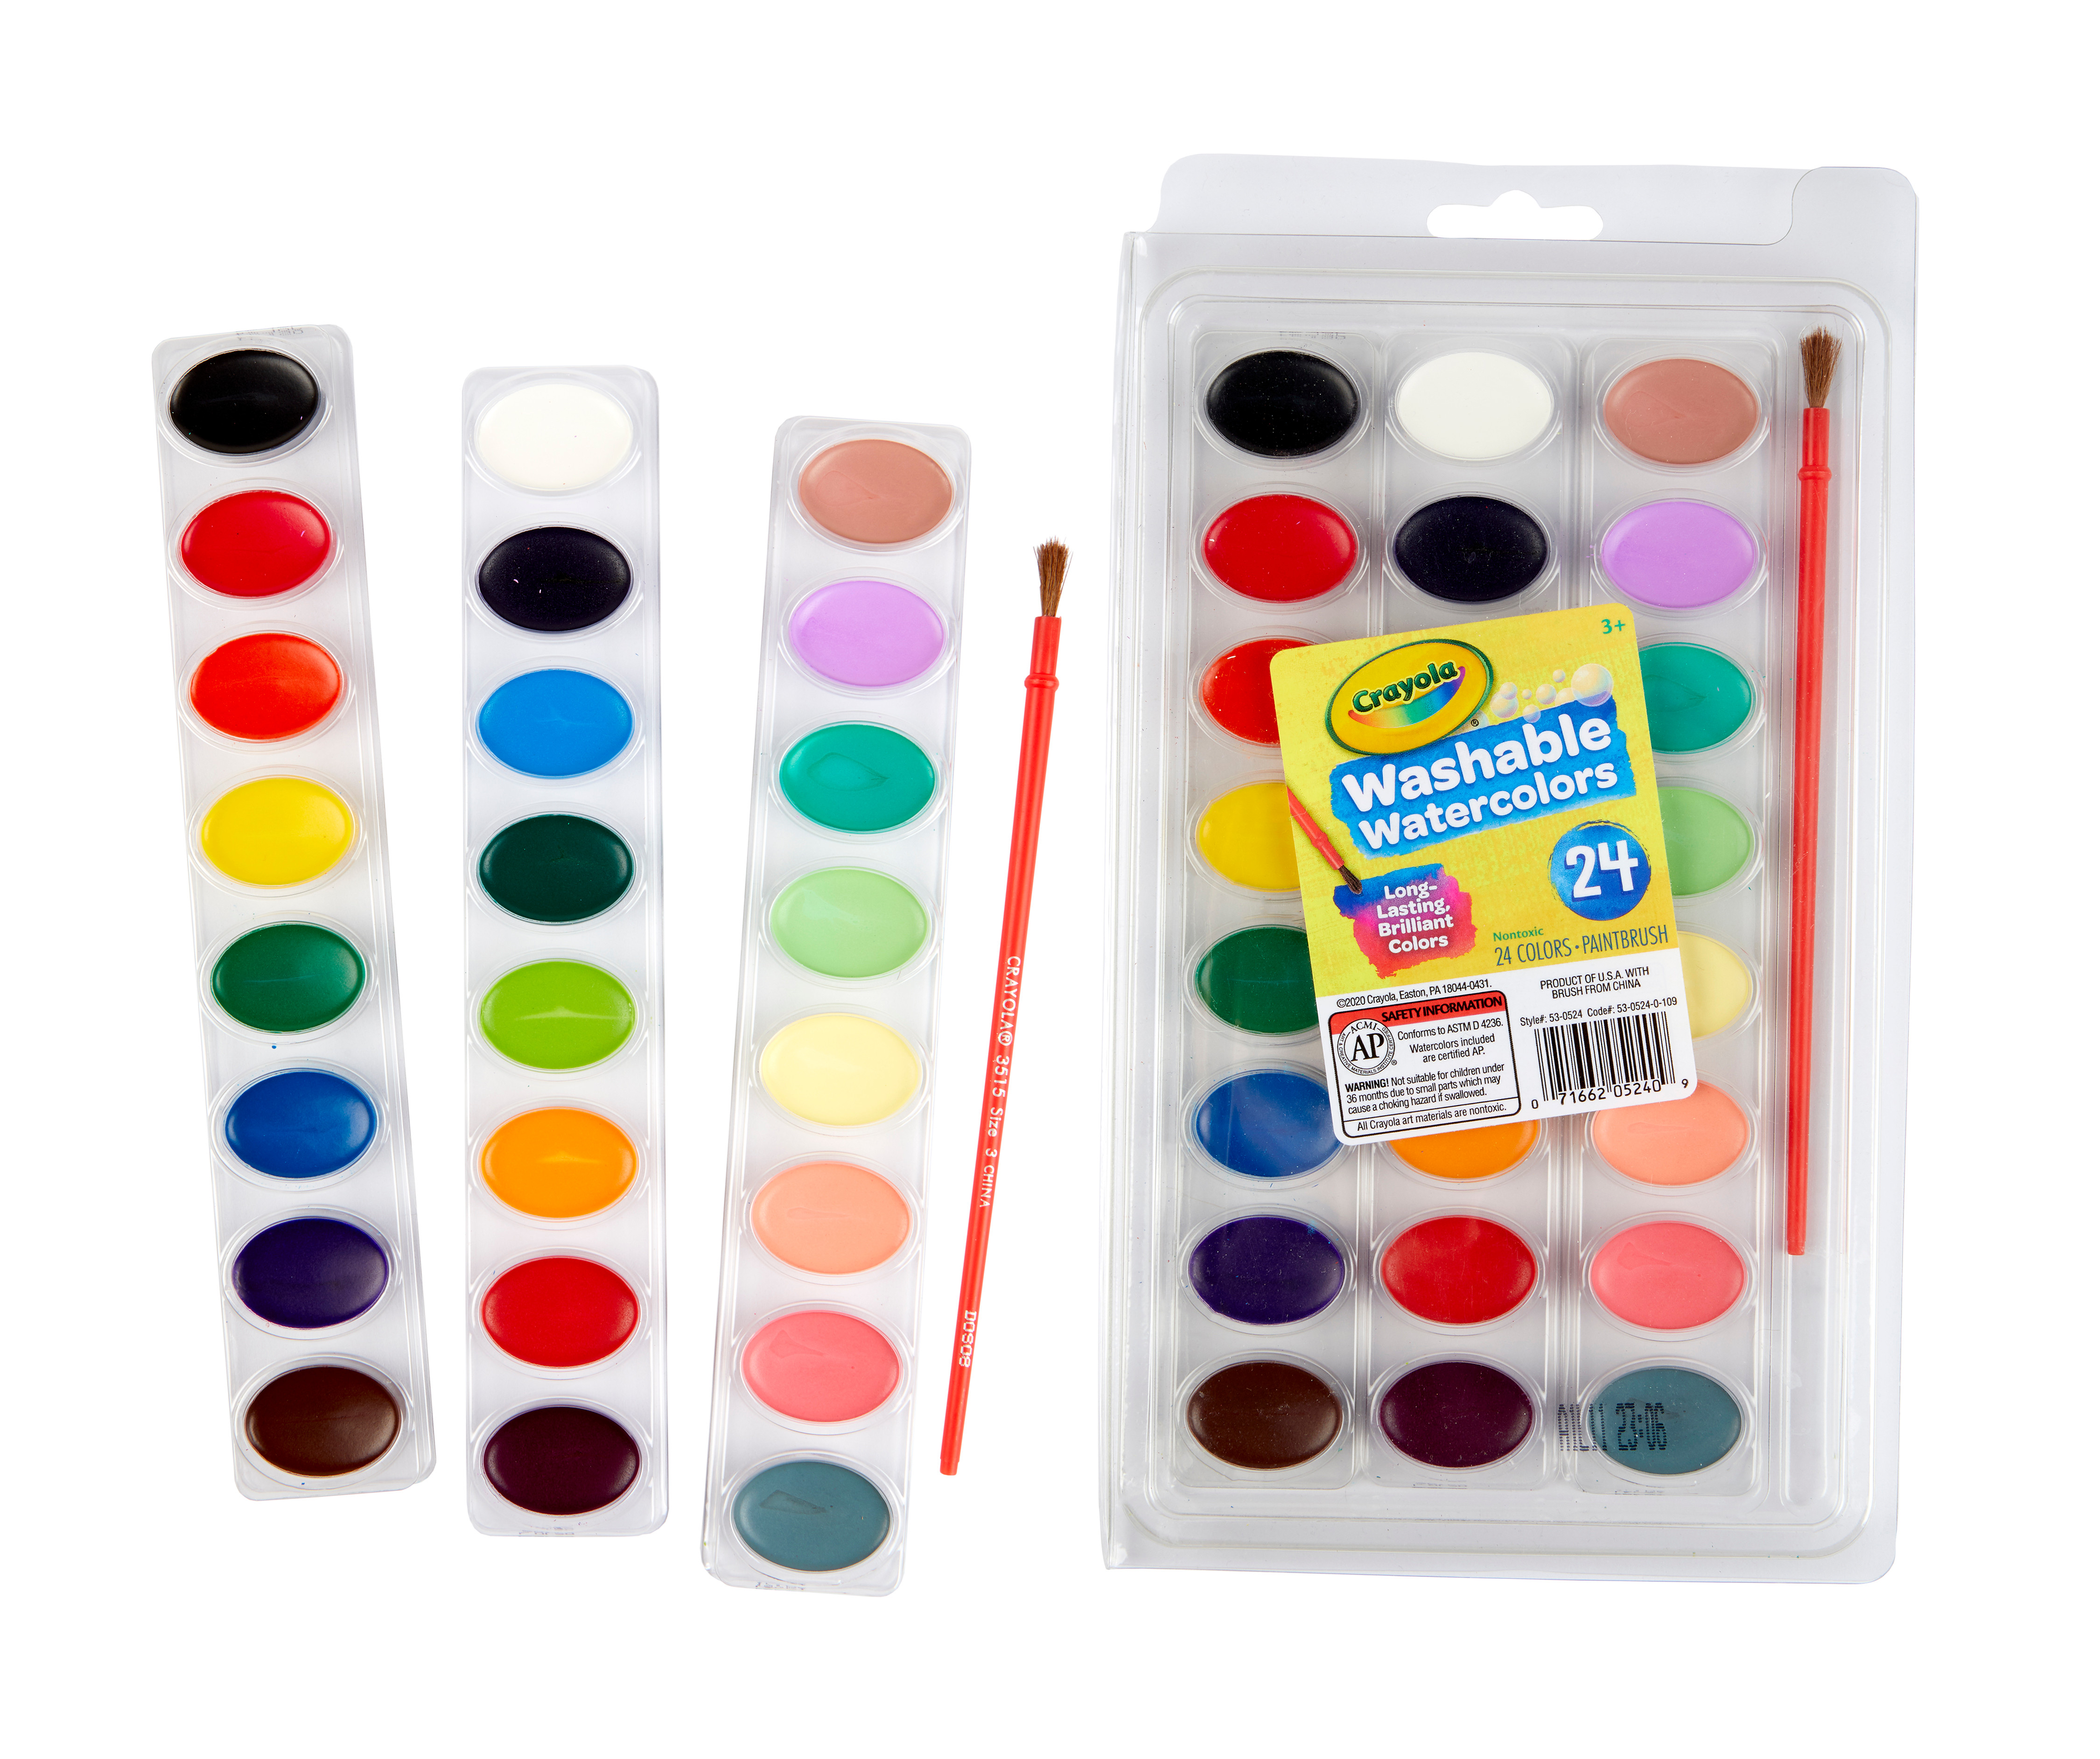 Crayola 24ct Watercolor Paints with Brush - image 6 of 8